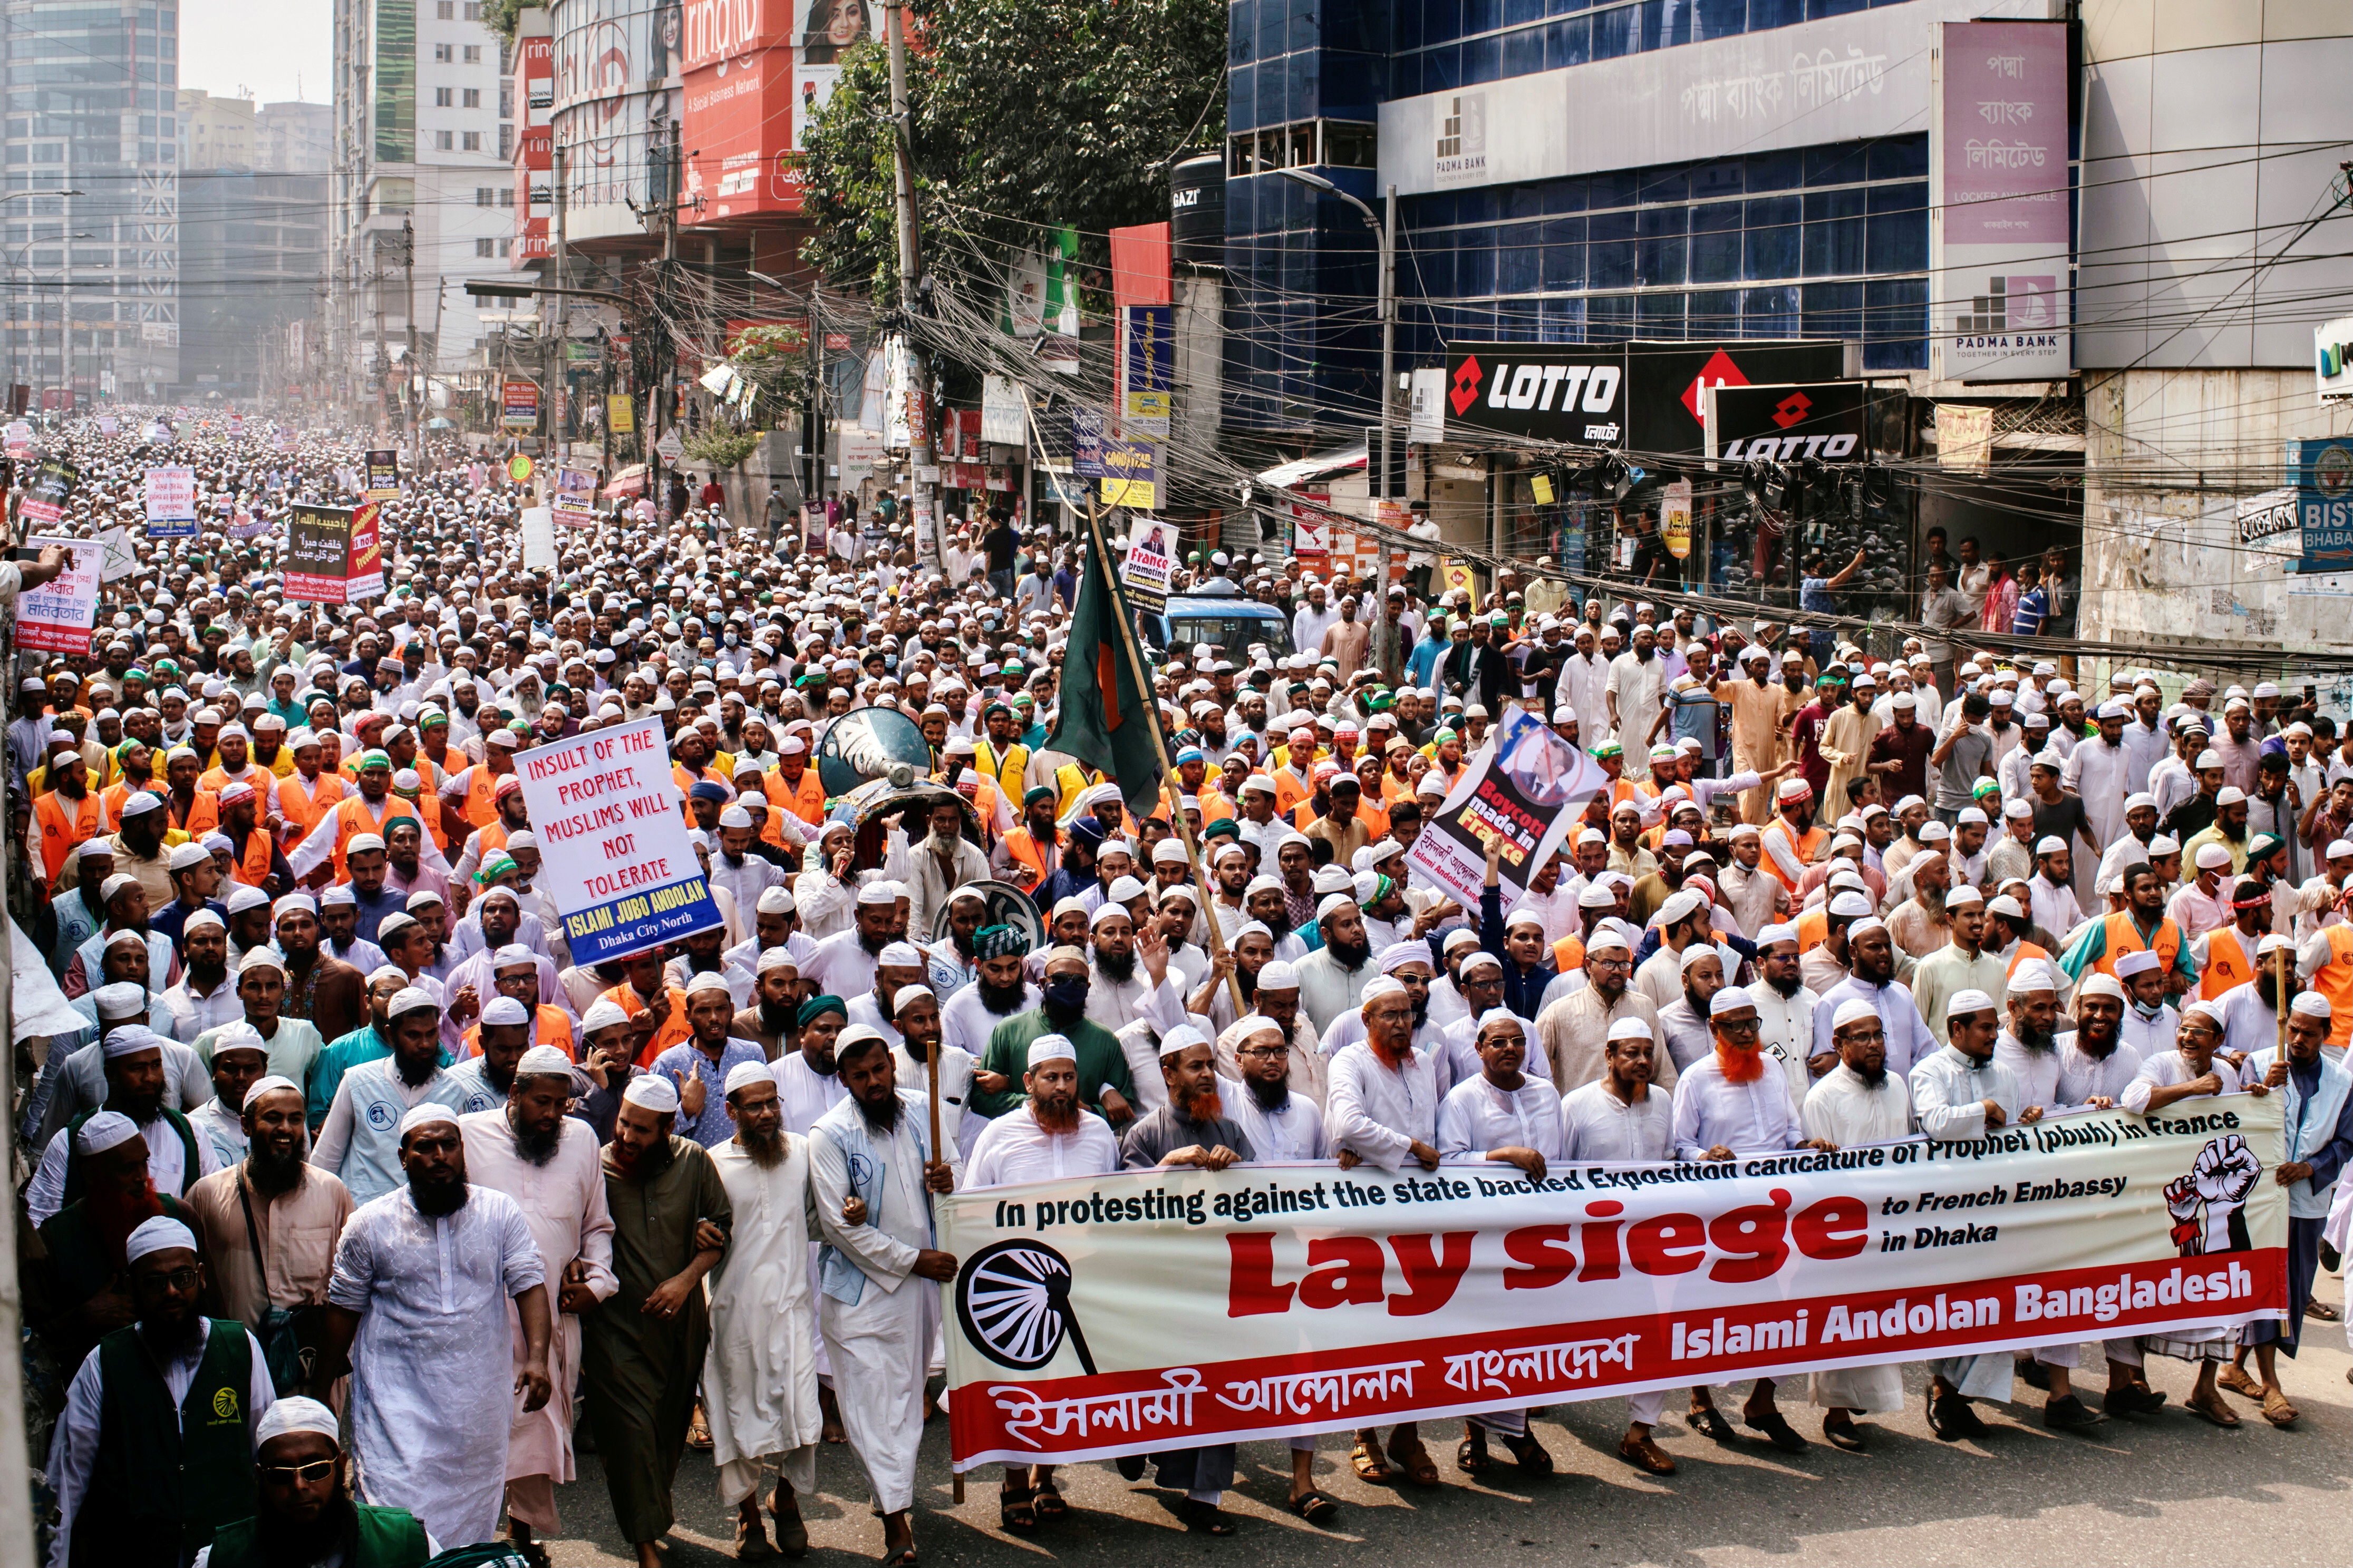 Supporters and activists of the Islami Andolan Bangladesh, an Islamic political party, take part in a protest calling for the boycott of French products and to denounce the French President Emmanuel Macron for his comments over a cartoon of Prophet Mohammad, in Dhaka, Bangladesh, October 27, 2020. REUTERS/Stringer NO RESALES. NO ARCHIVES.